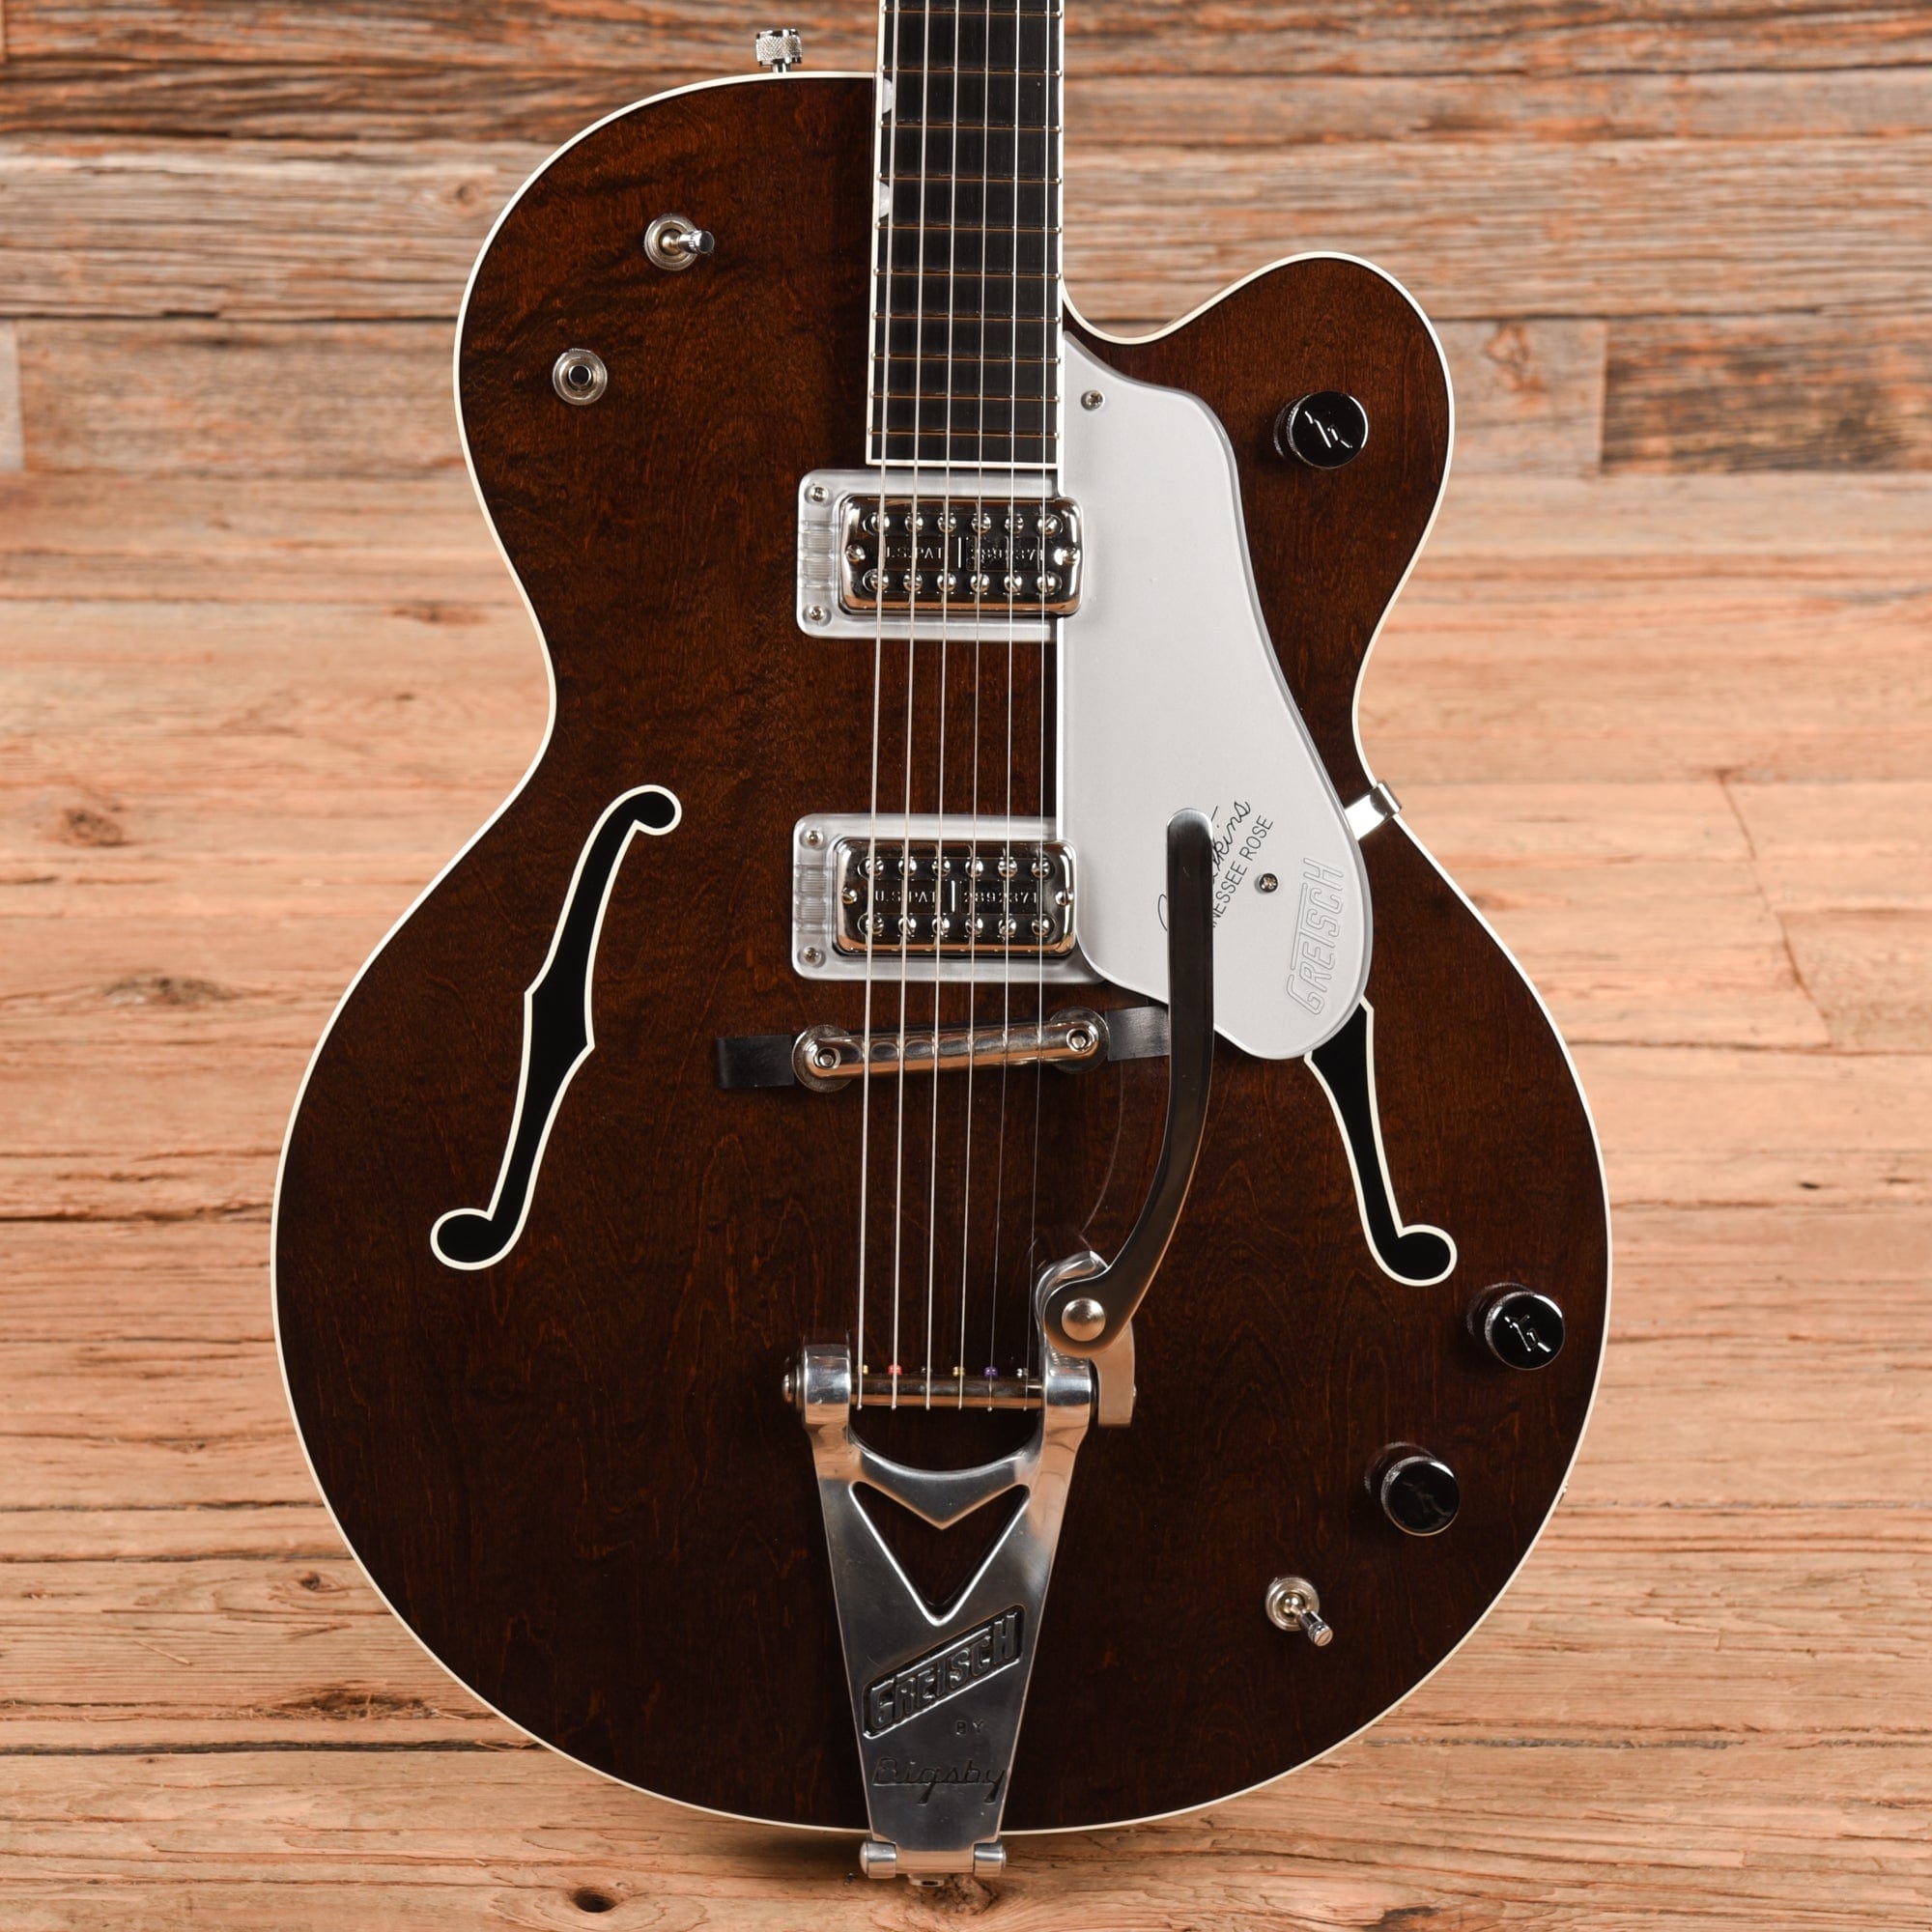 Gretsch G6119 Chet Atkins Tennessee Rose Deep Cherry Stain 2006 Electric Guitars / Hollow Body